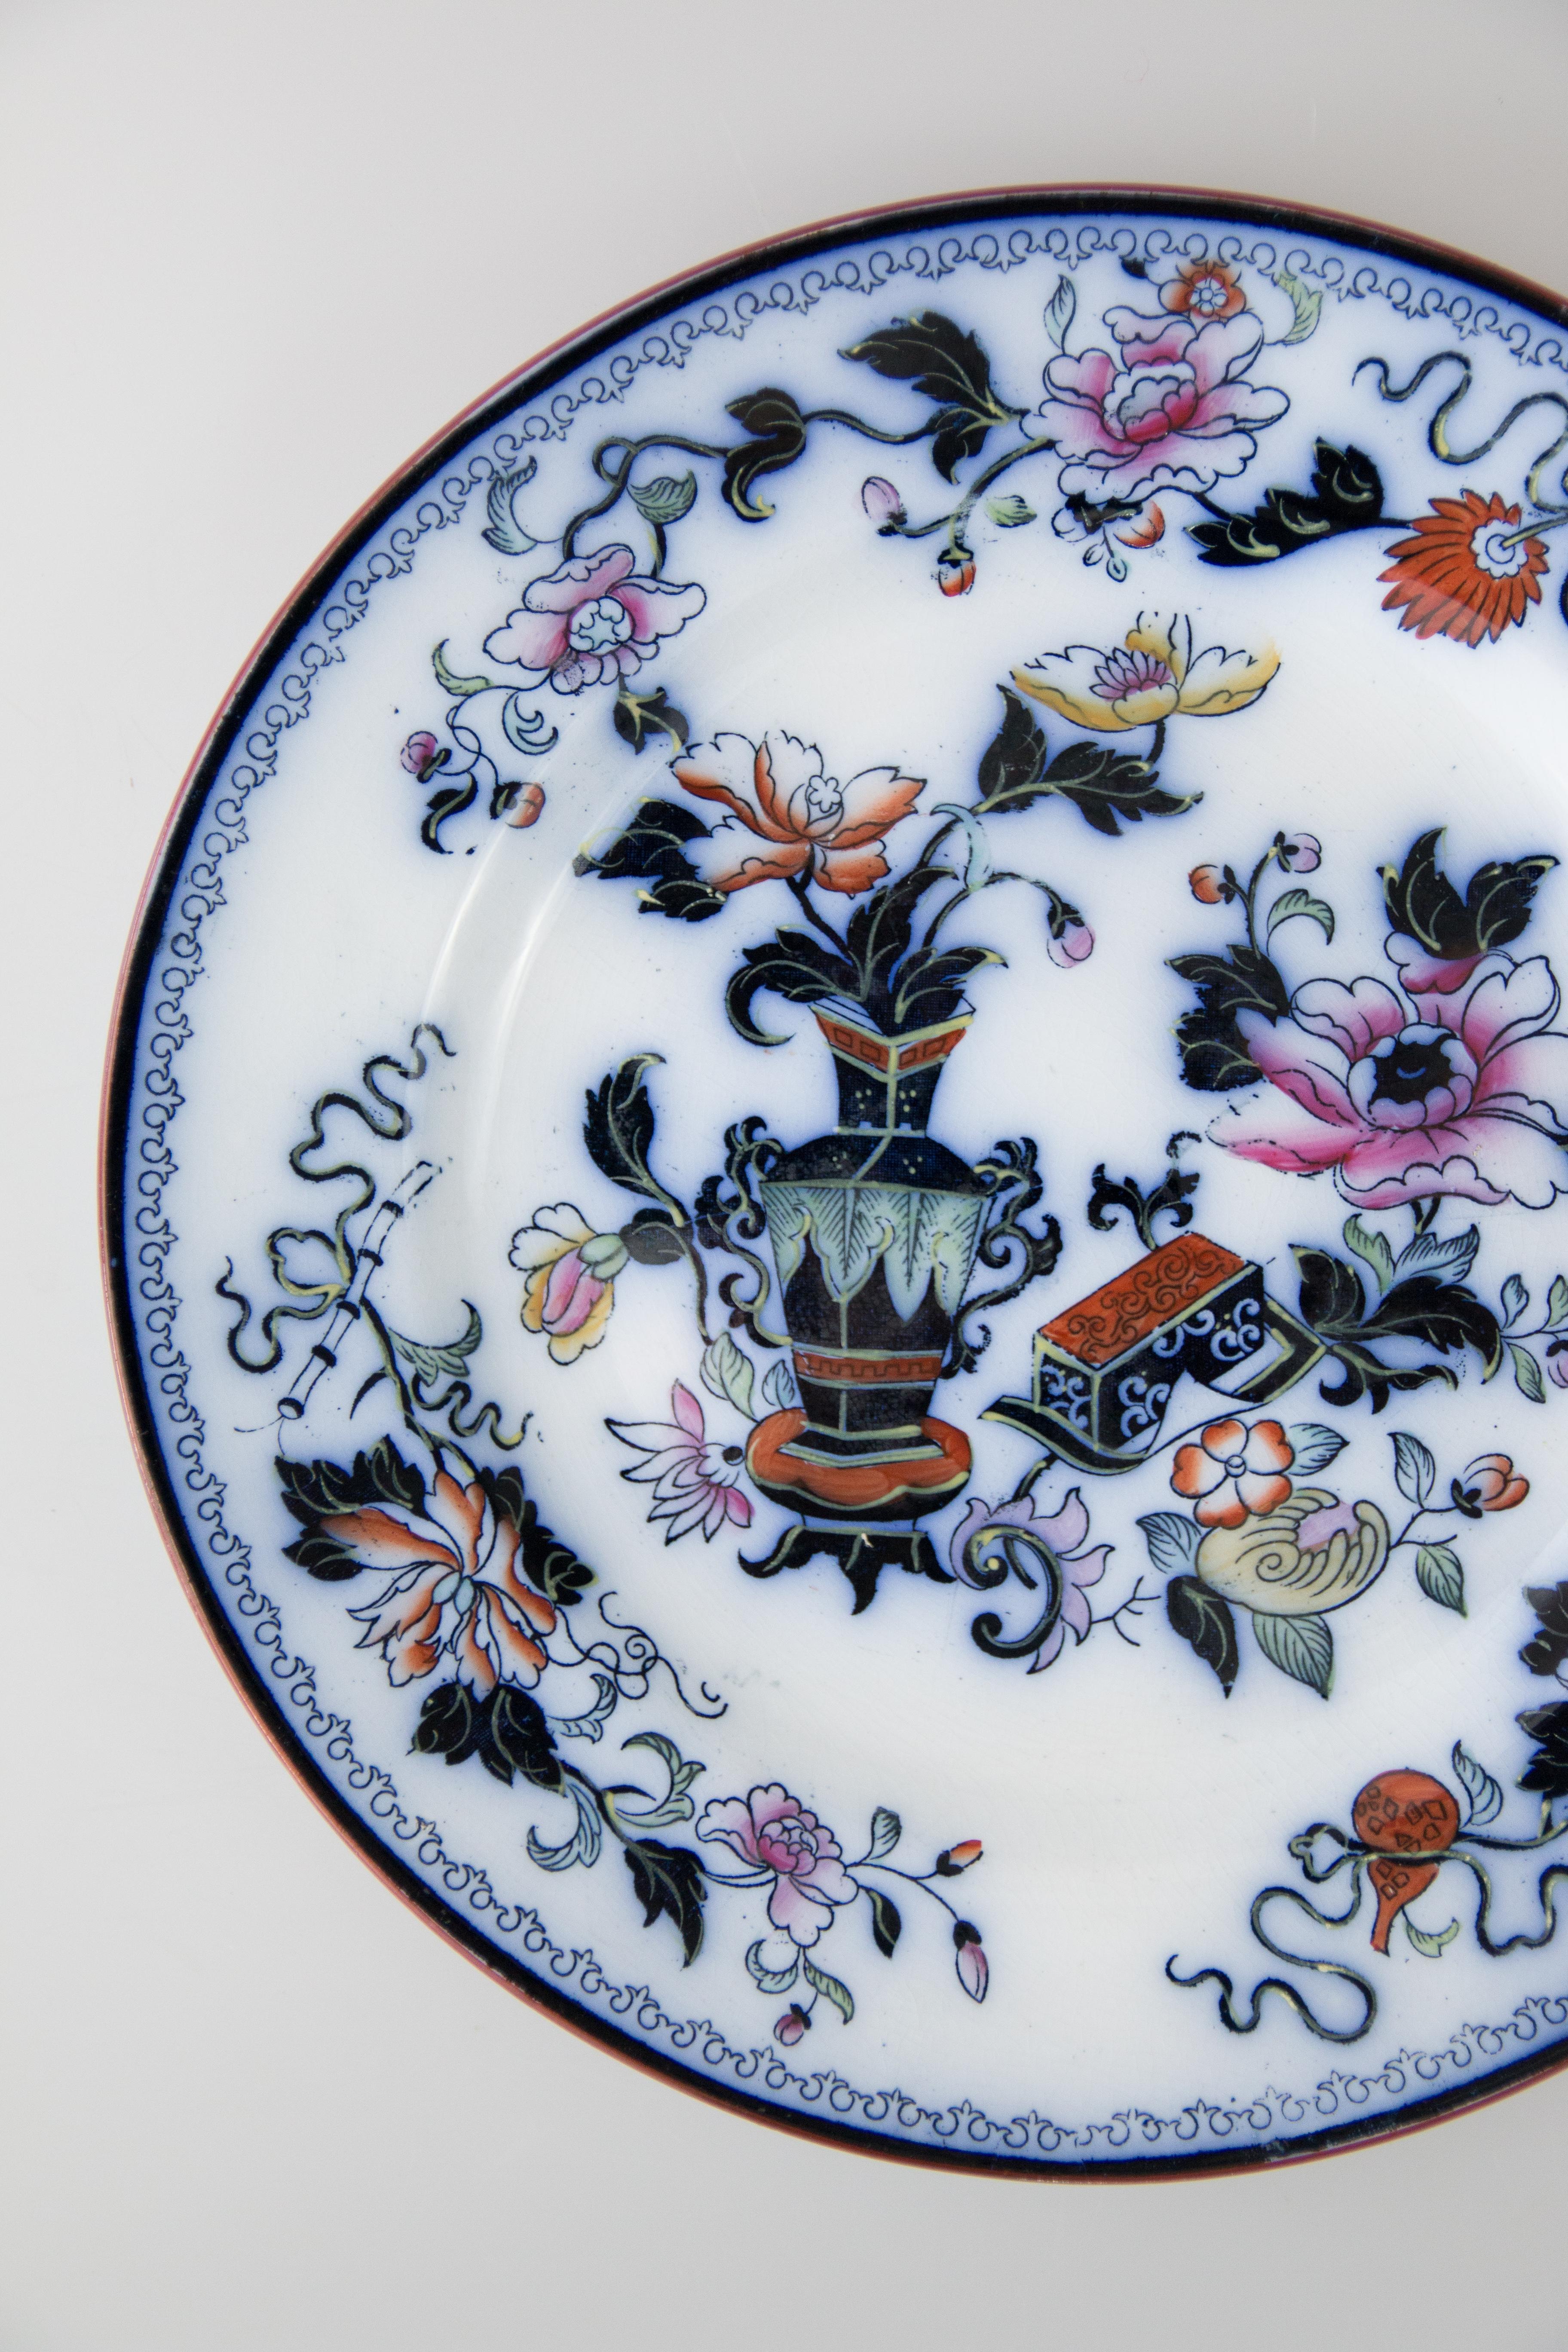 A lovely antique English Staffordshire chinoiserie style transferware porcelain plate made by Ridgway, circa 1870. Marked 